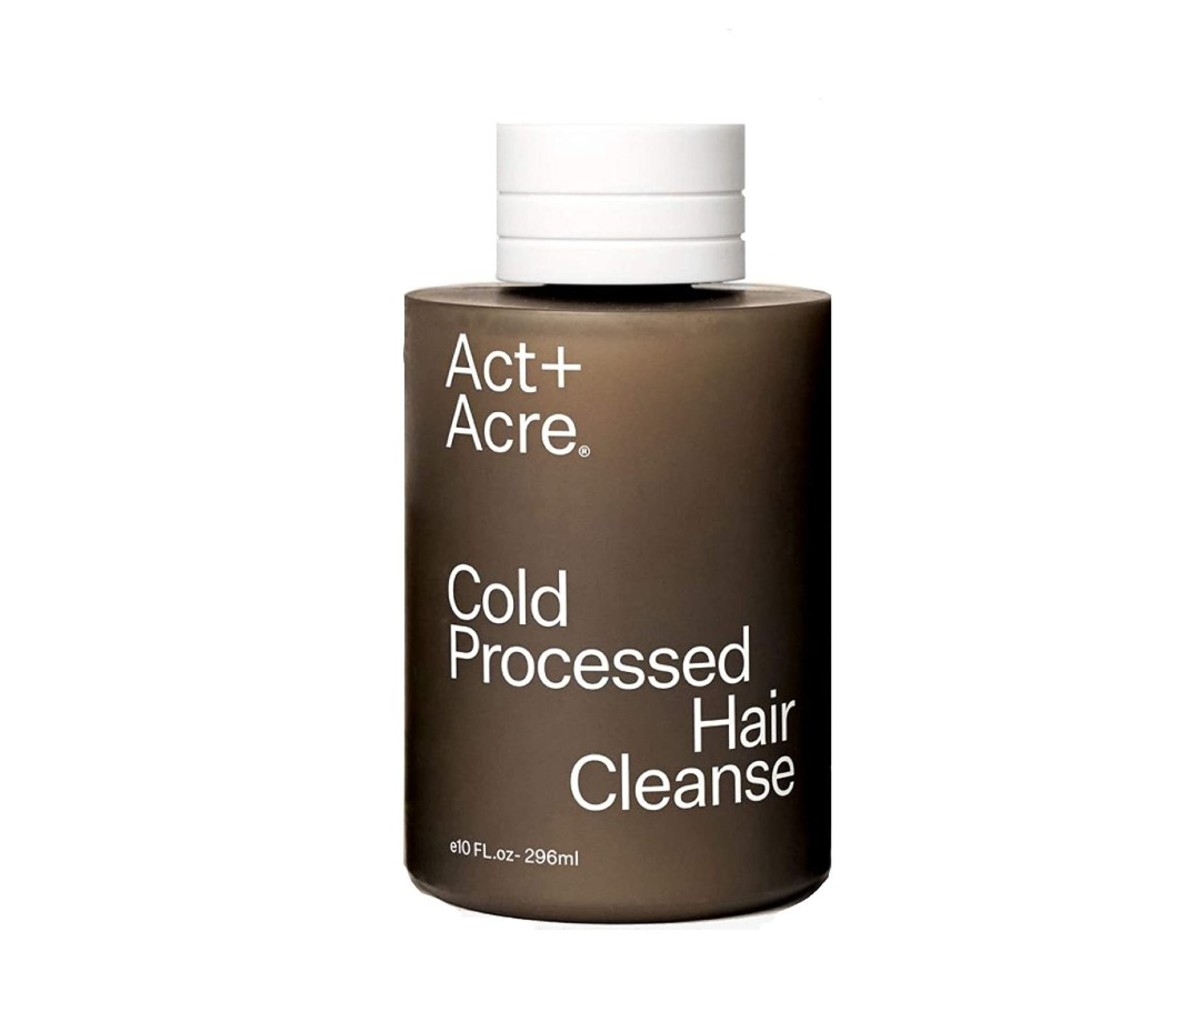 Act+Acre Cold Processed Hair Cleanse